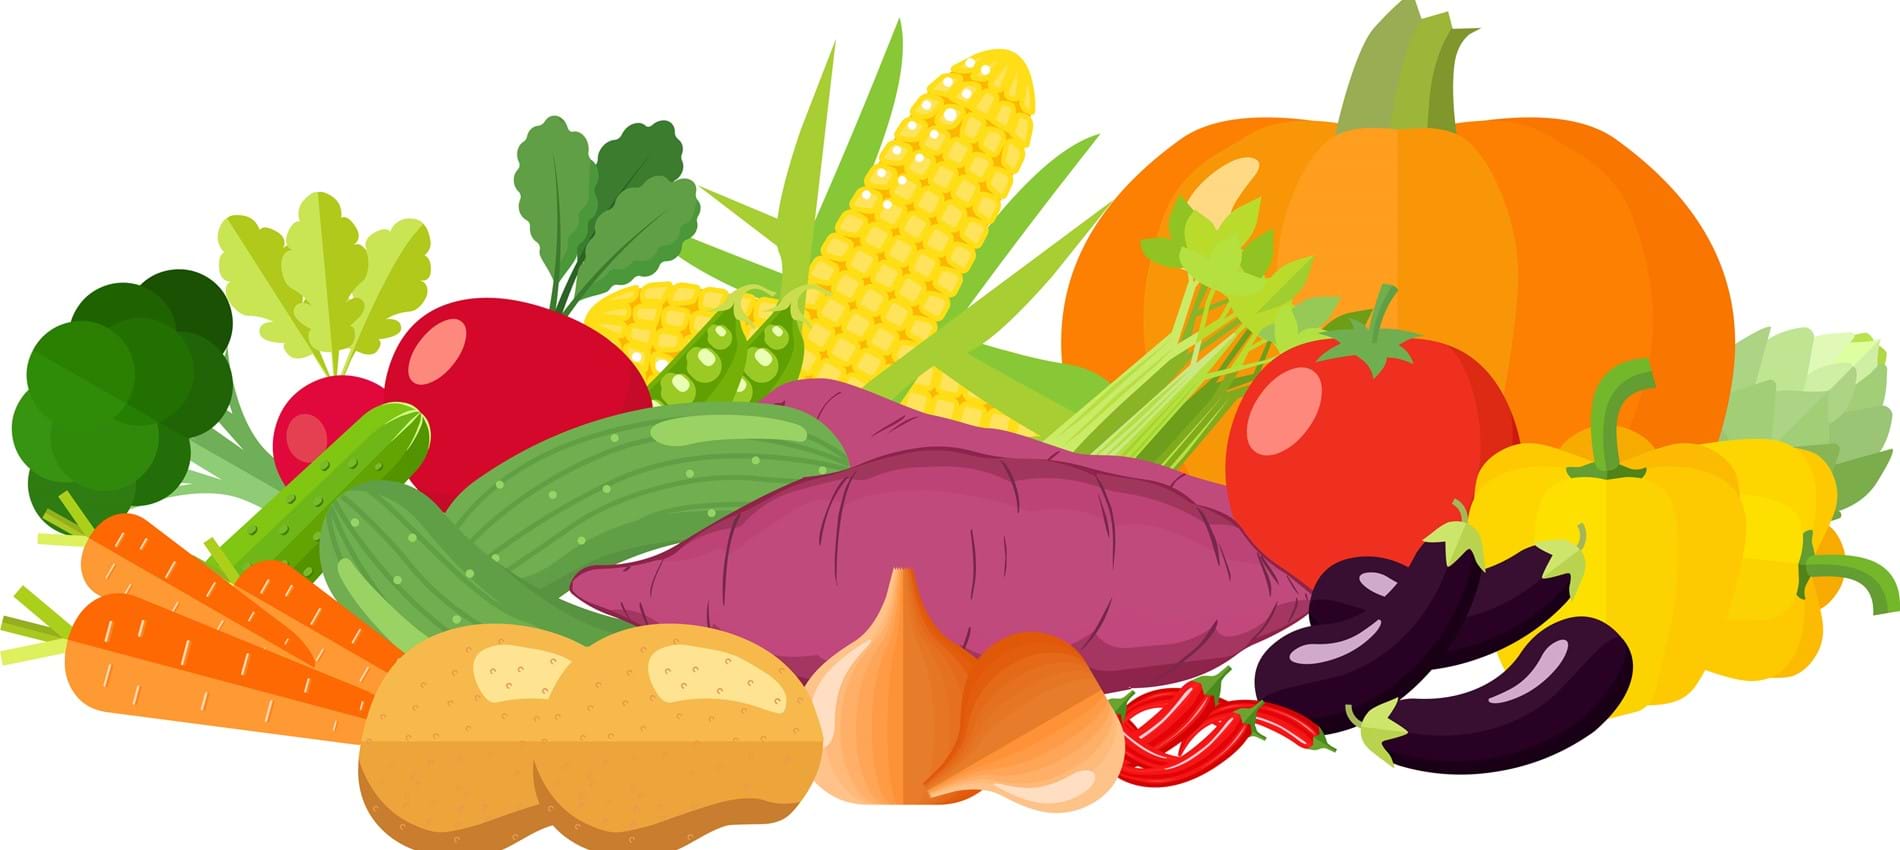 nojs An illustrated group of lots of different vegetables including aubergine, potatoes, carrots, pumpkin, peppers, onion and broccoli.